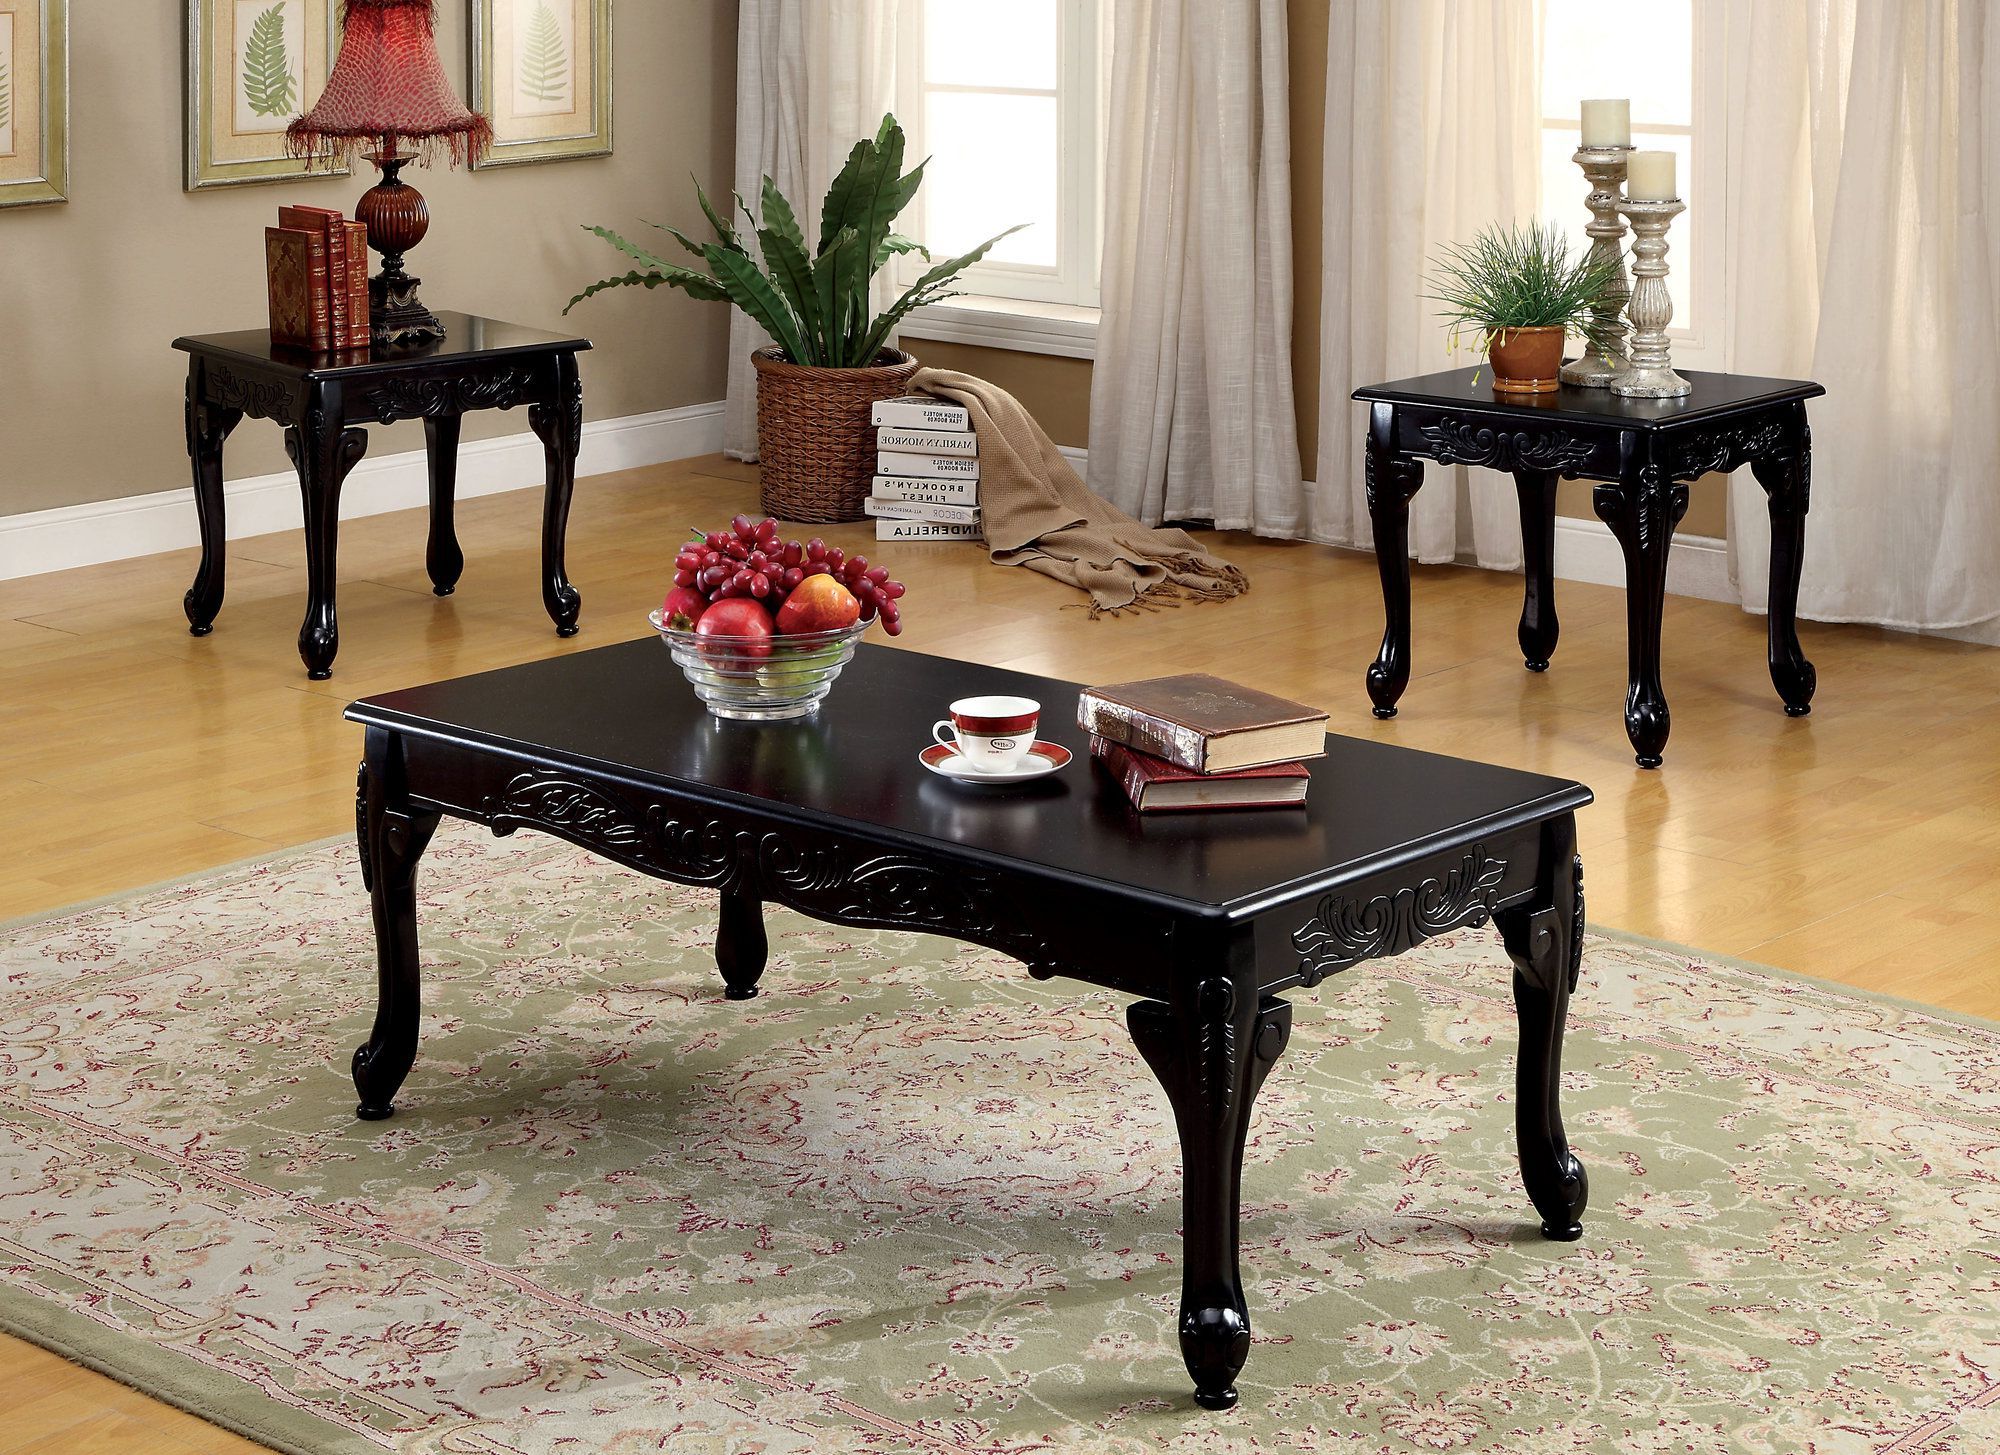 Coffee Table Setting With Most Up To Date 3 Piece Coffee Tables (View 6 of 20)